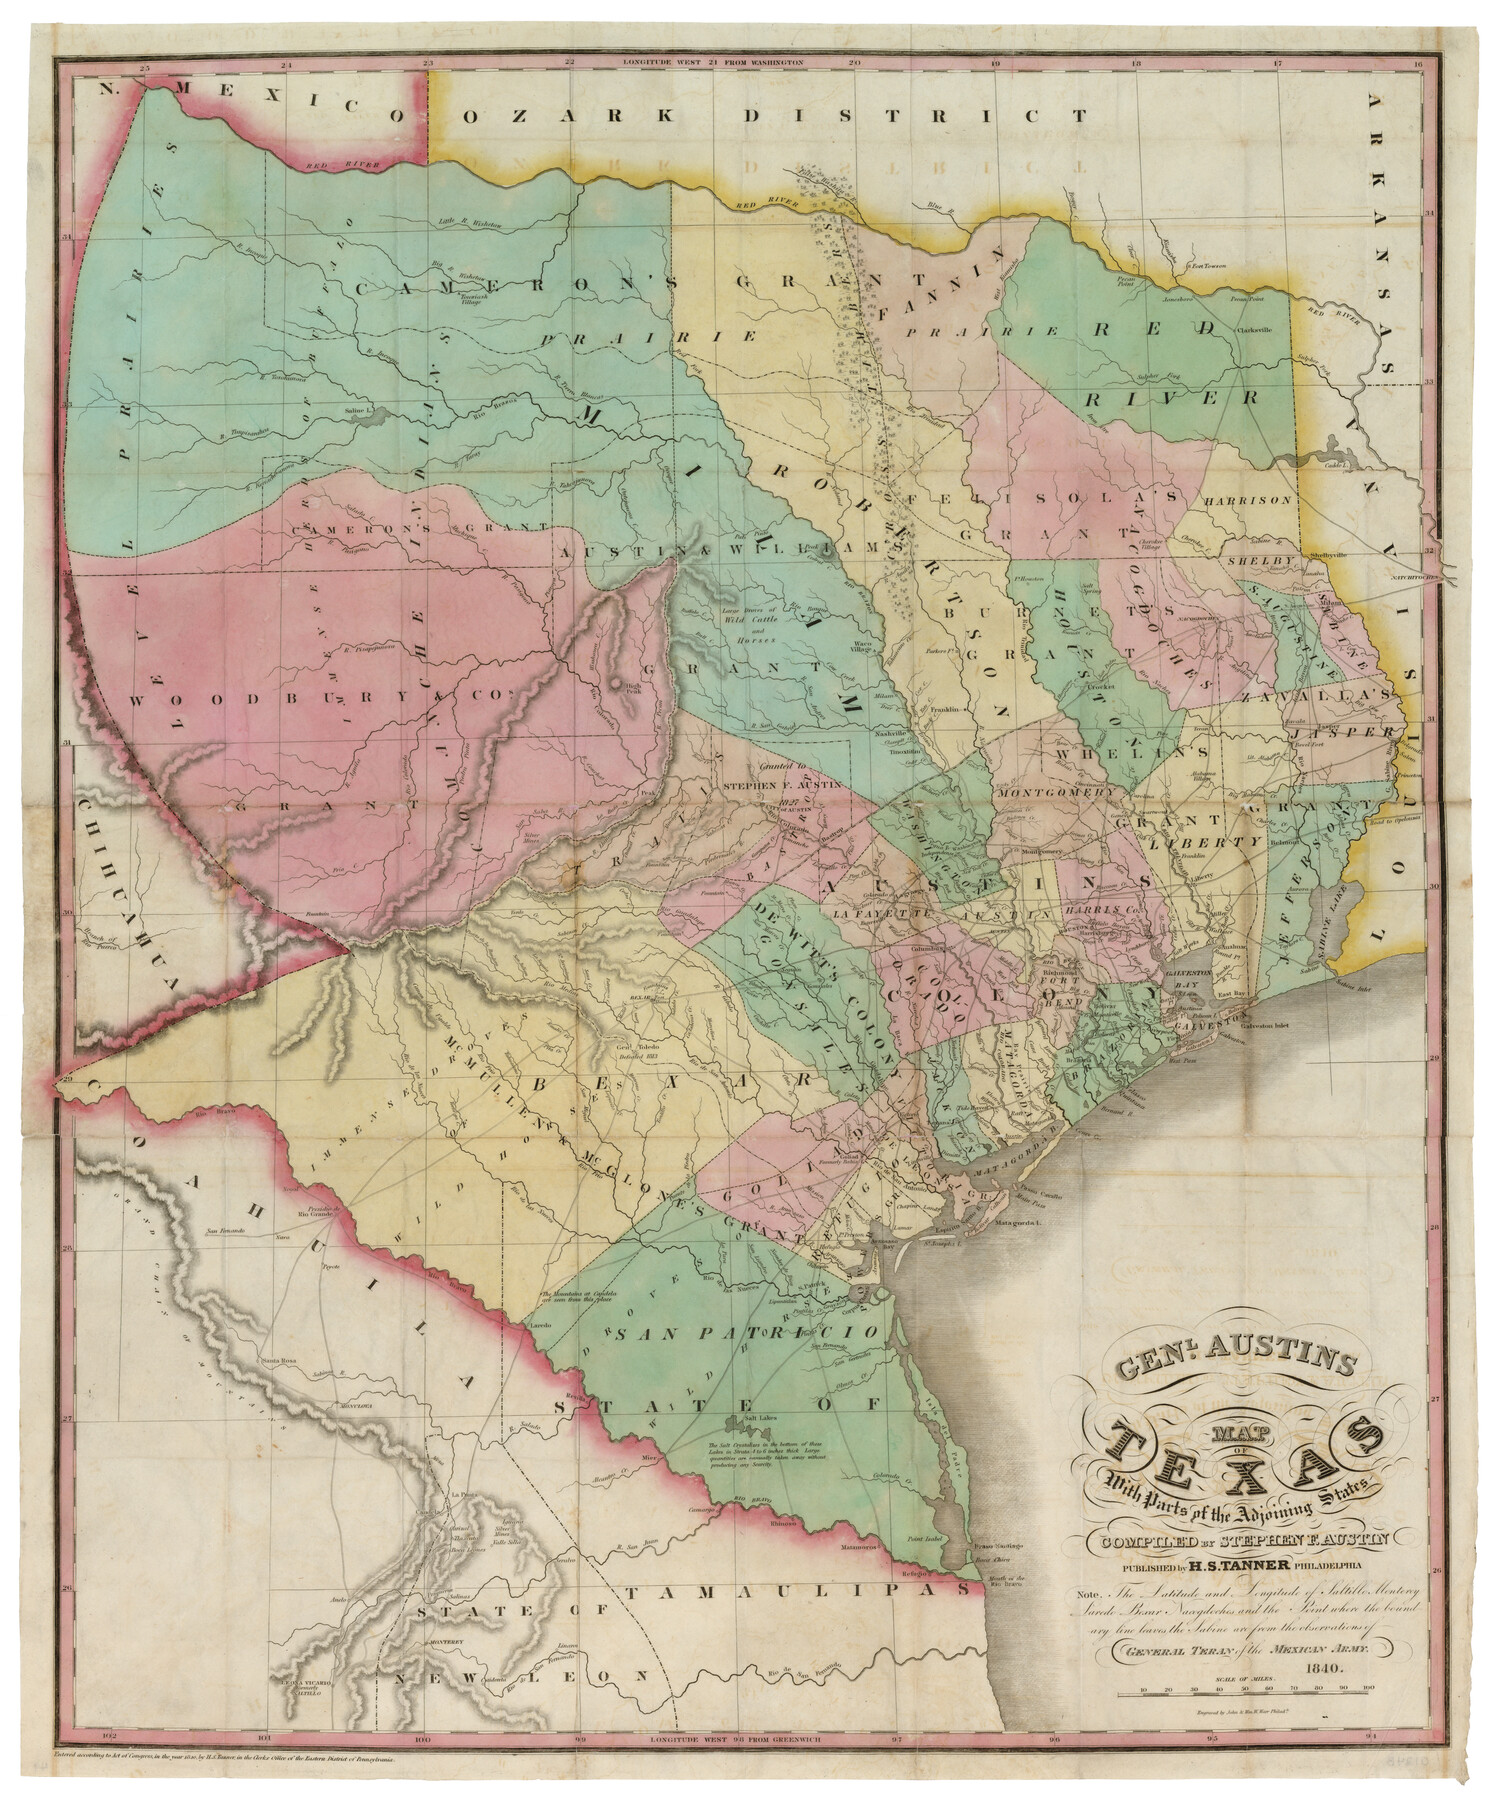 93860, Genl Austins Map of Texas with parts of the adjoining States, Holcomb Digital Map Collection